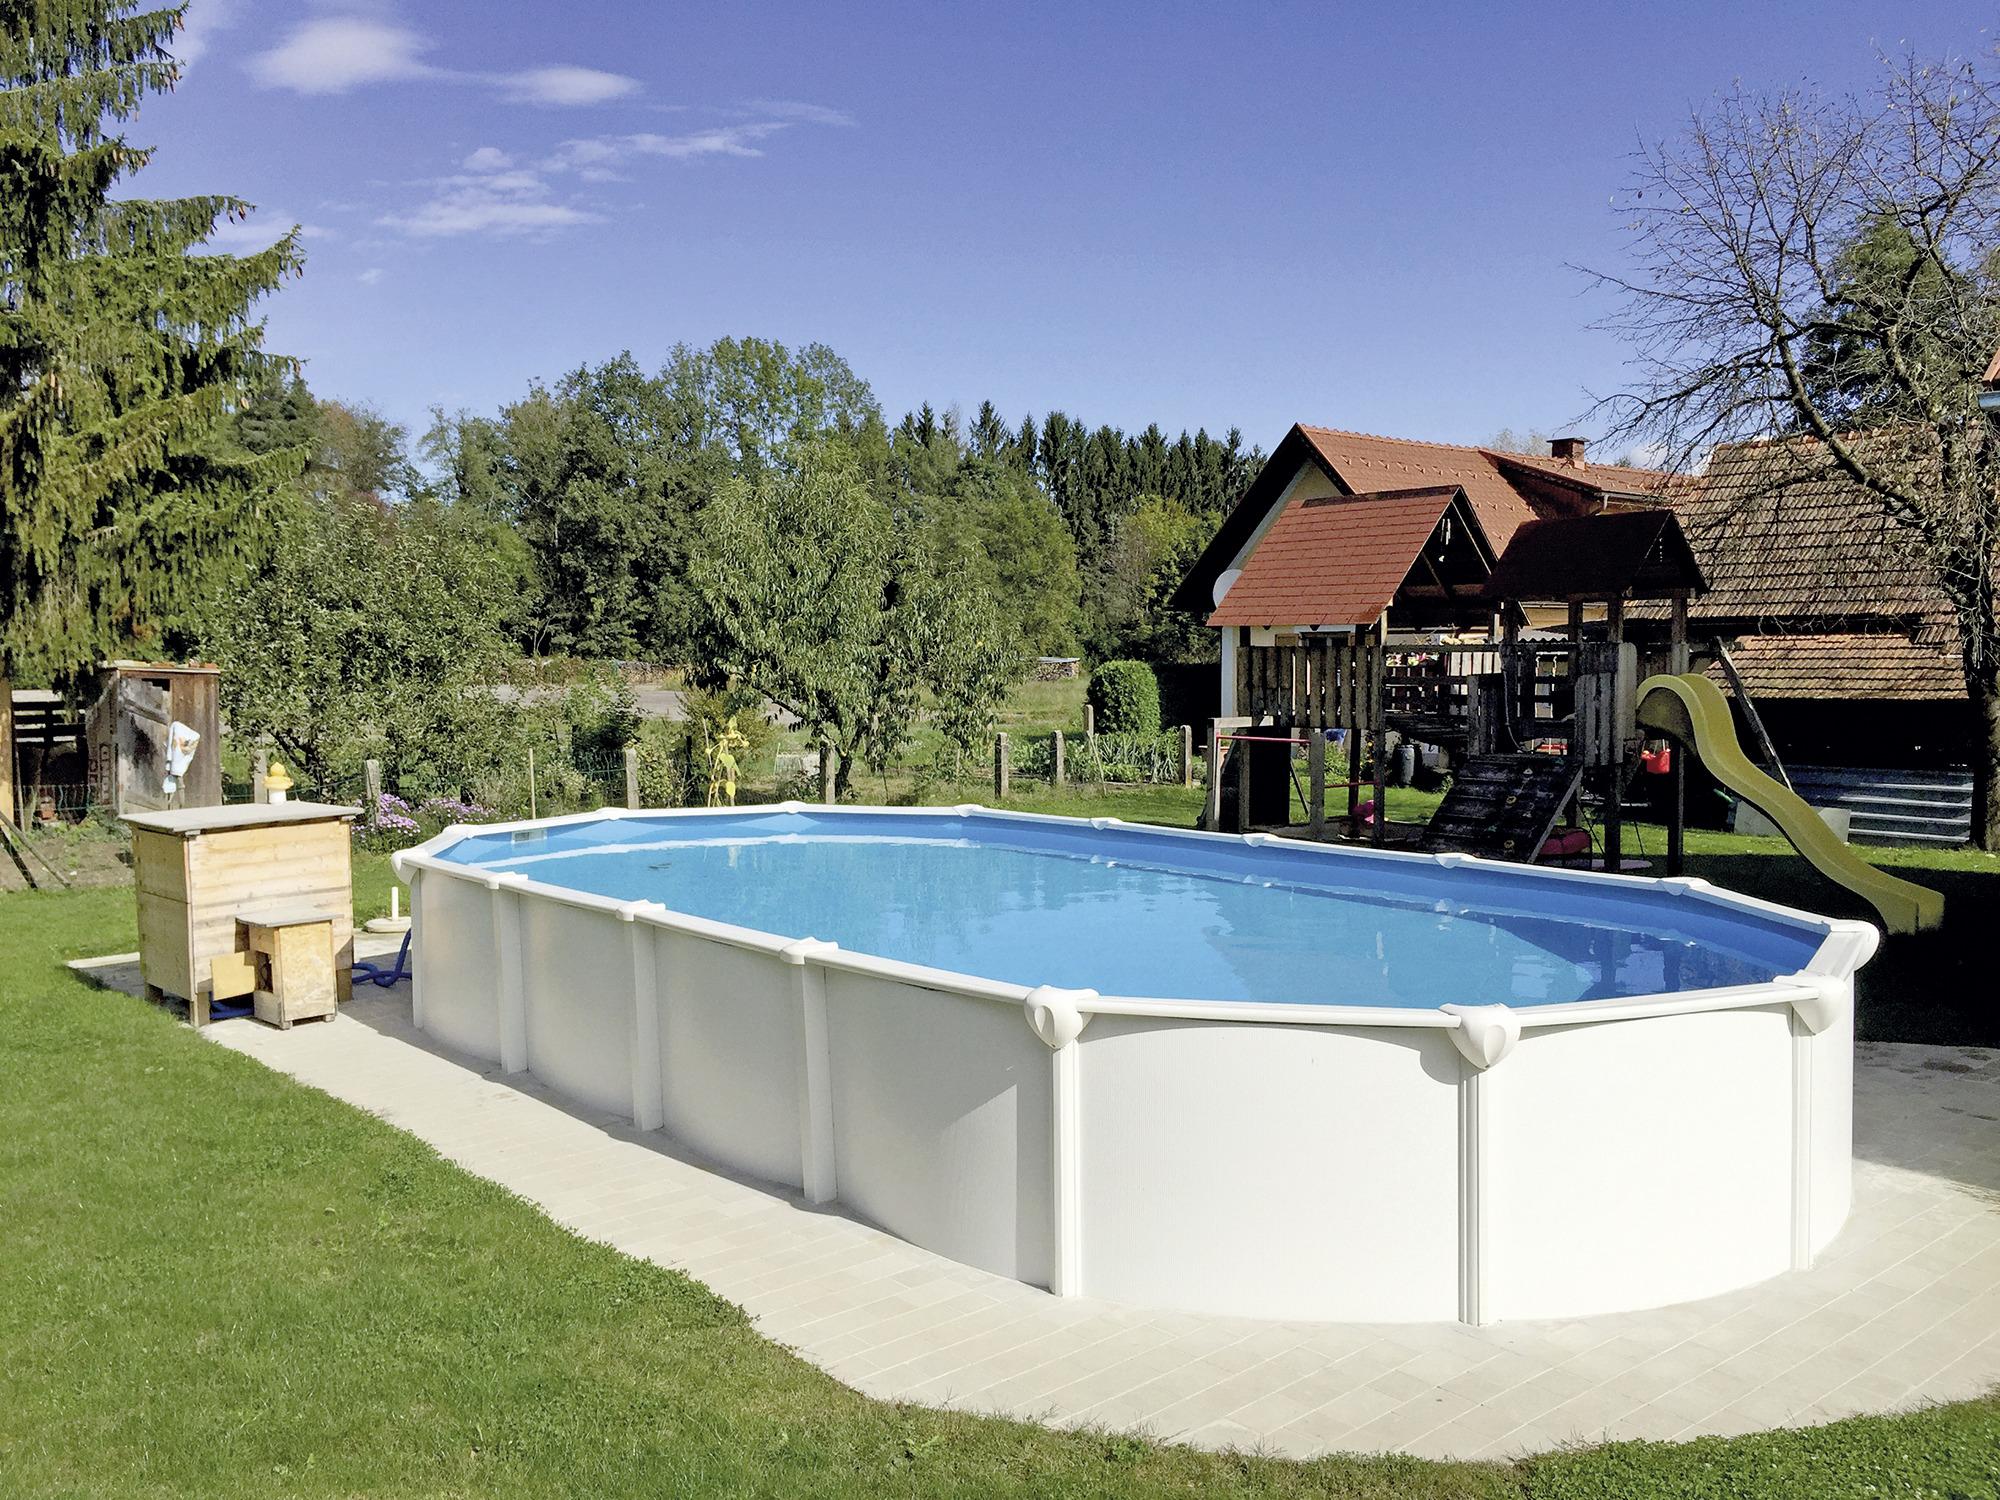 Benefits of Wooden Pool Decking